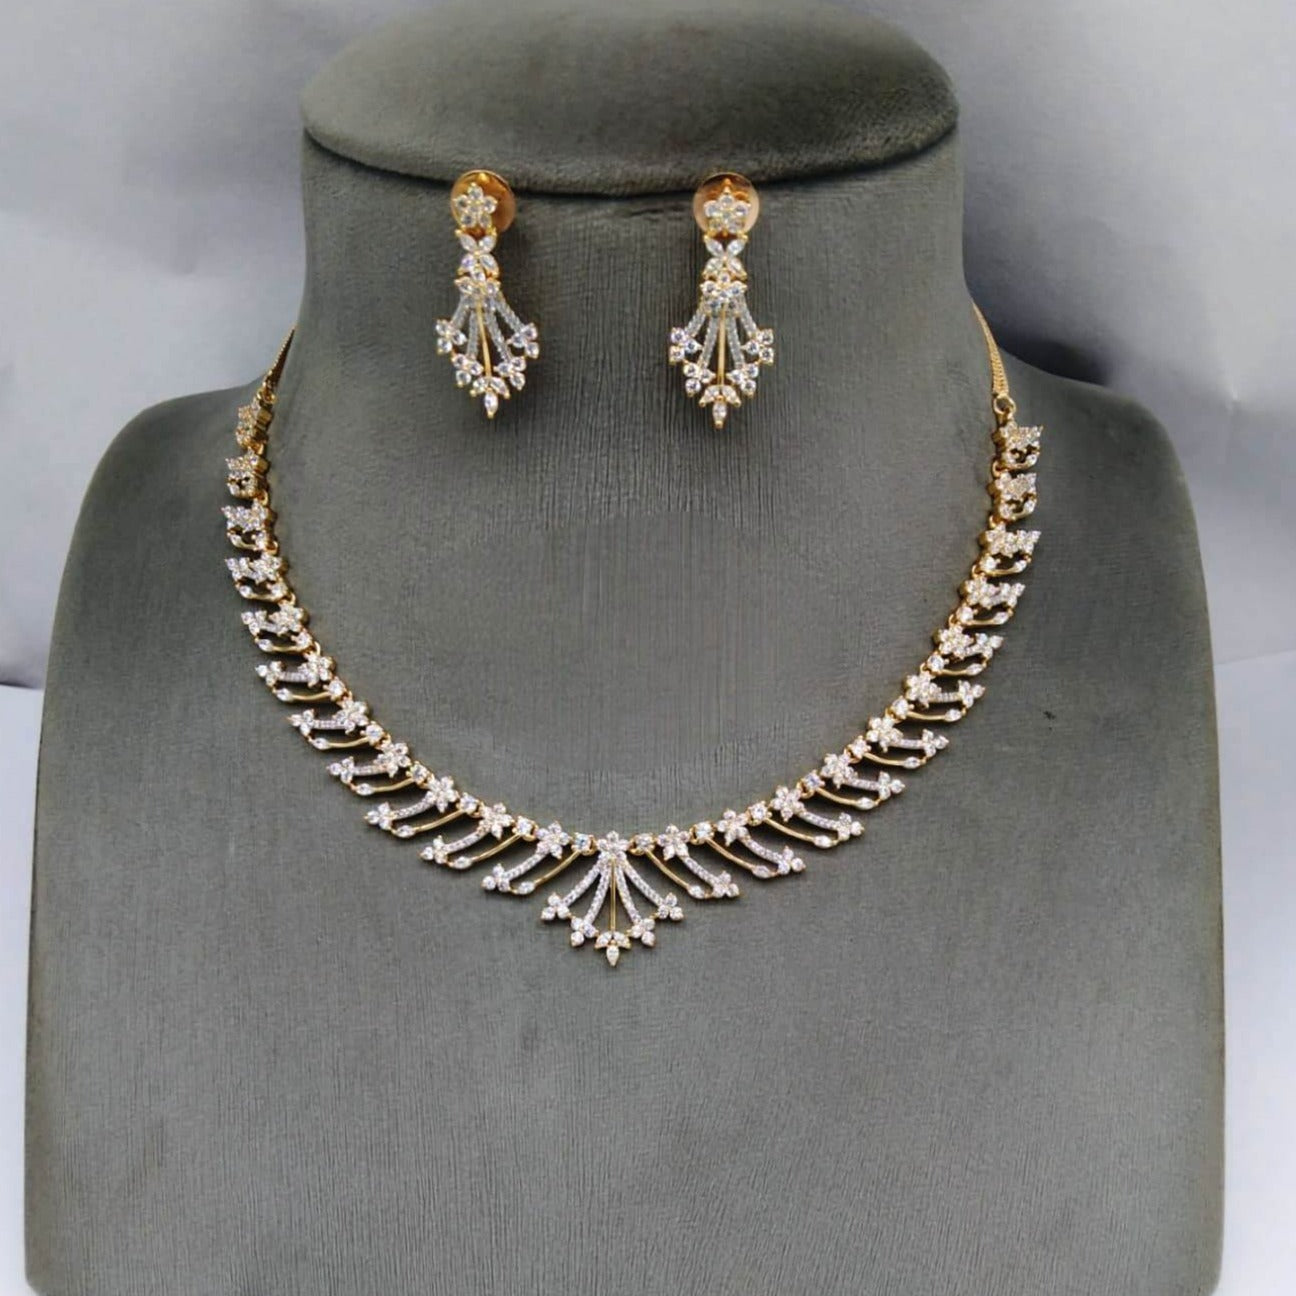 Celestial Charm: American Diamond Necklace and Earrings Set , occassion jewellery,partywear jewellery, wedding jewellery